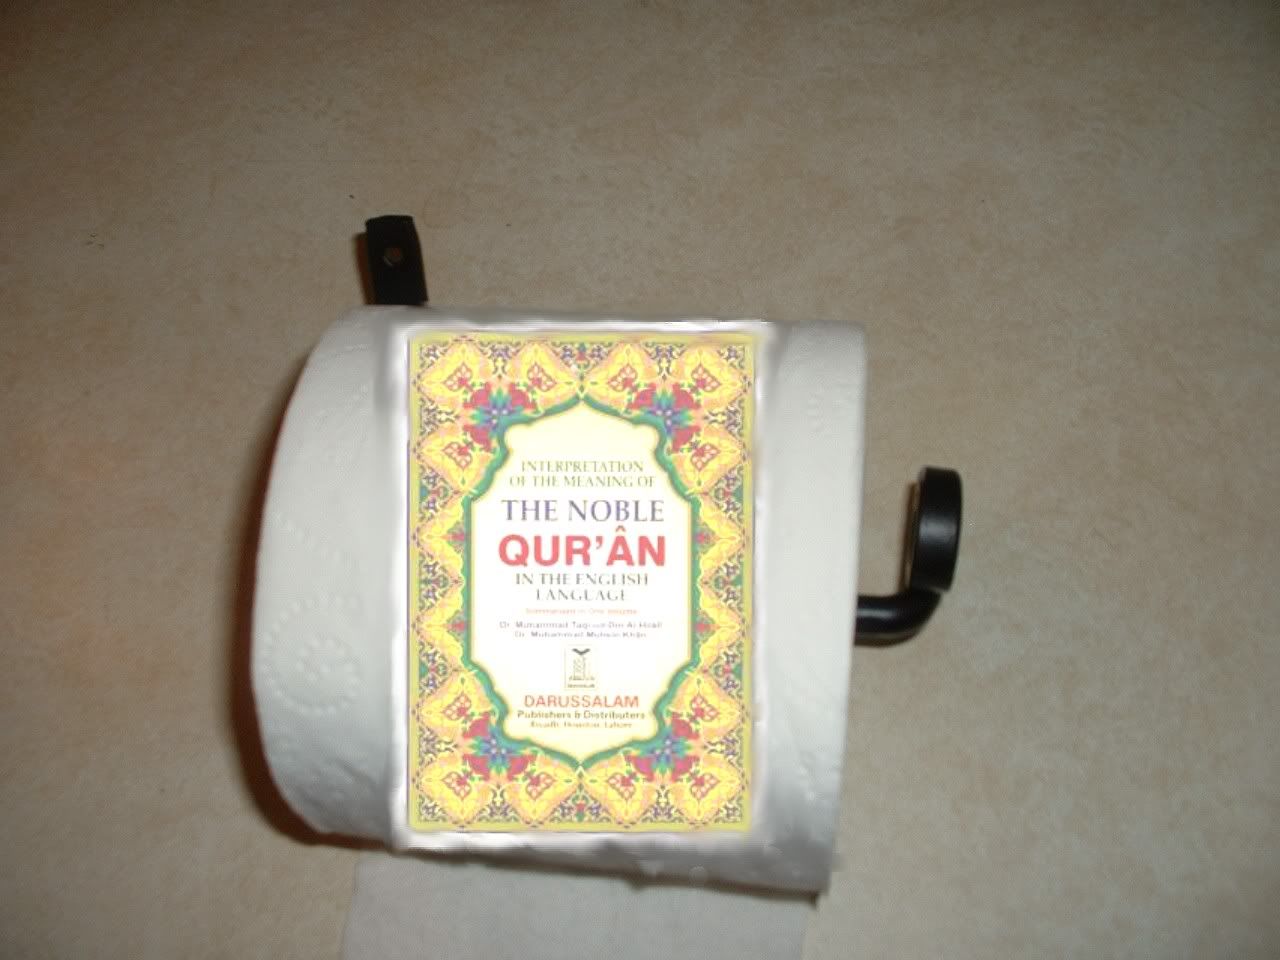 Quran the Right Way! Image hosted by Photobucket.com